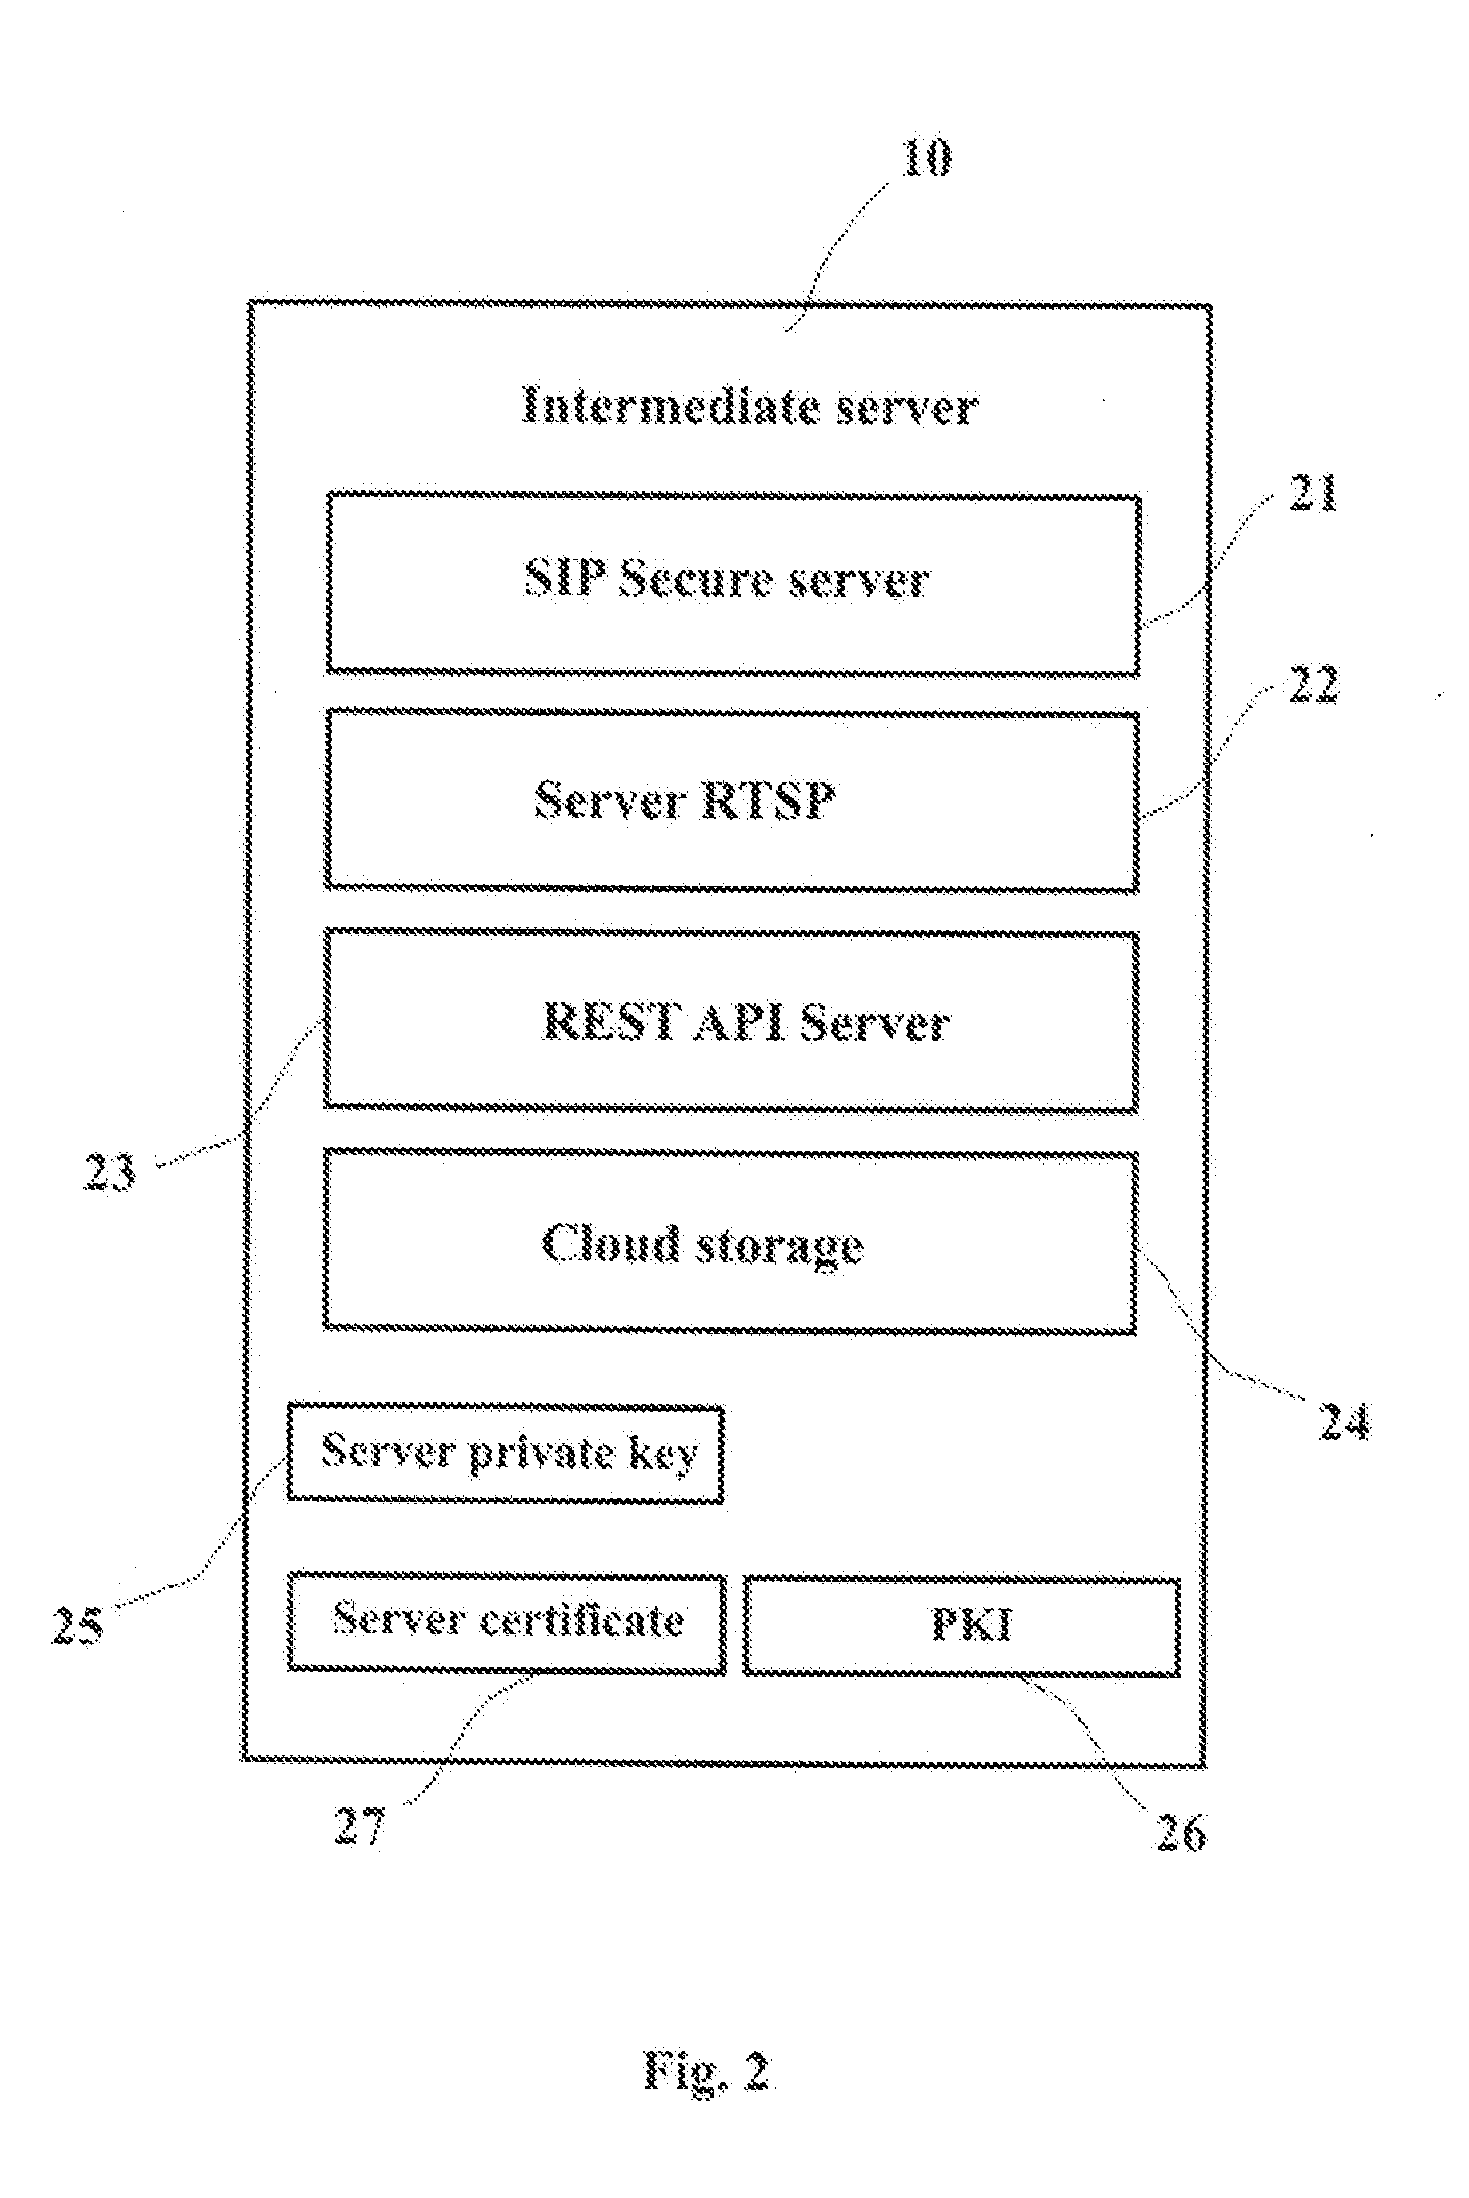 Systems for Securing Control and Data Transfer of Smart Camera